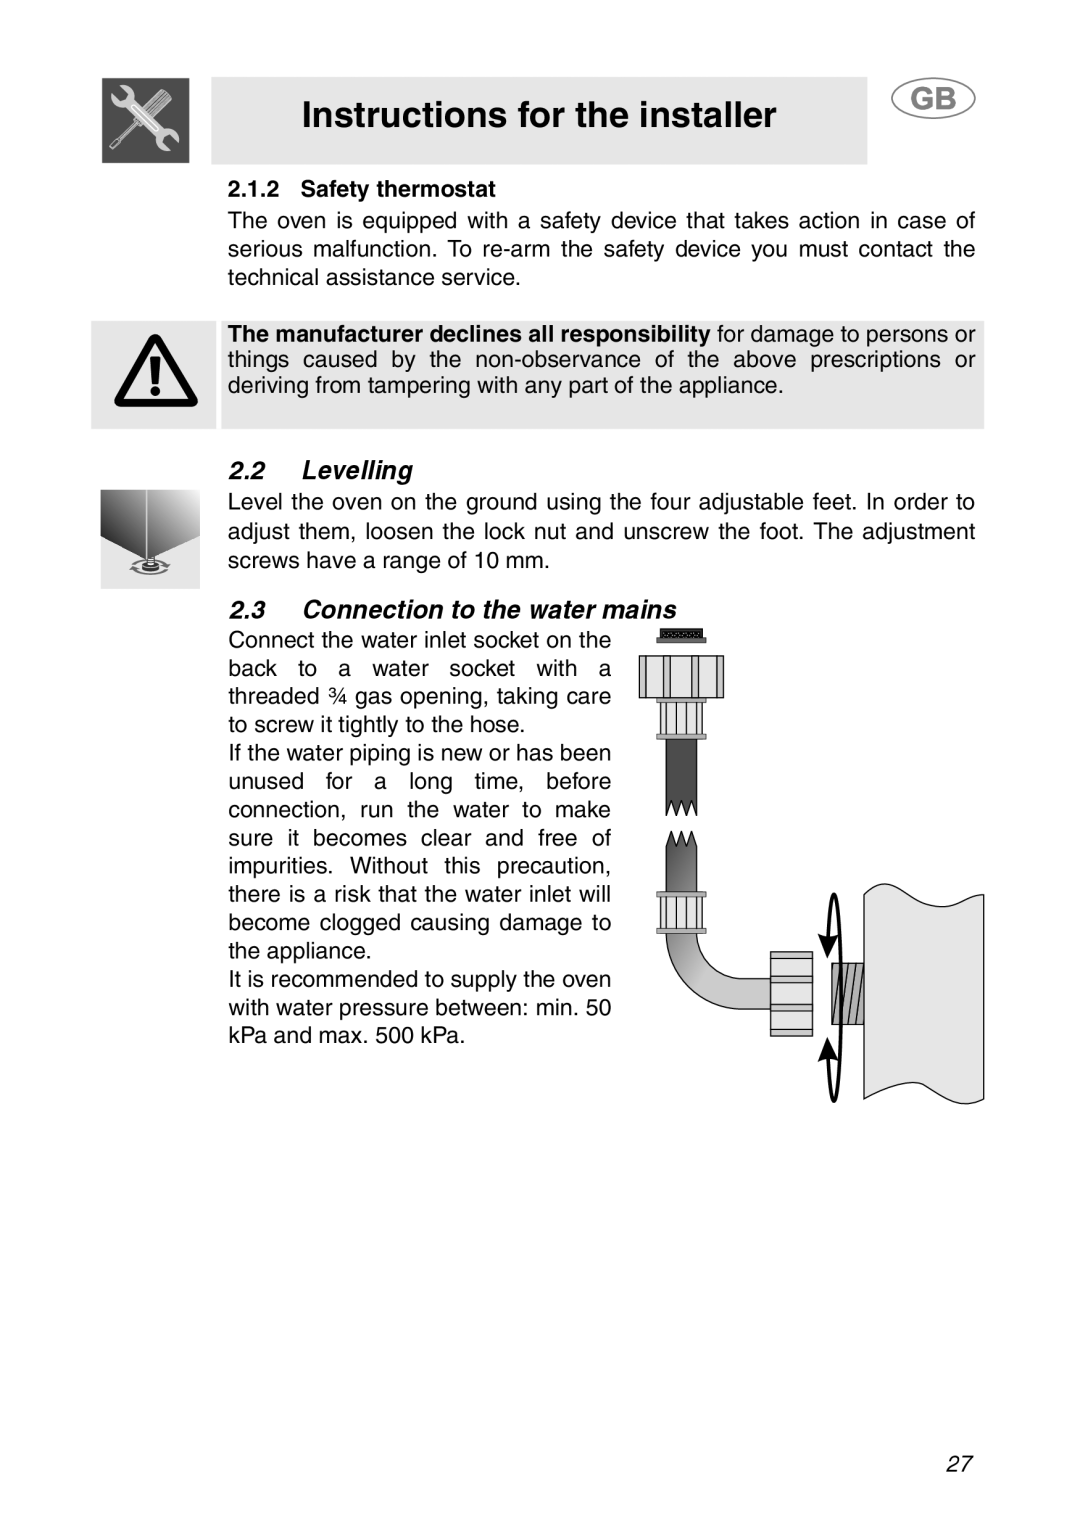 Smeg ALFA341XM manual Levelling, Connection to the water mains, Safety thermostat, Instructions for the installer 